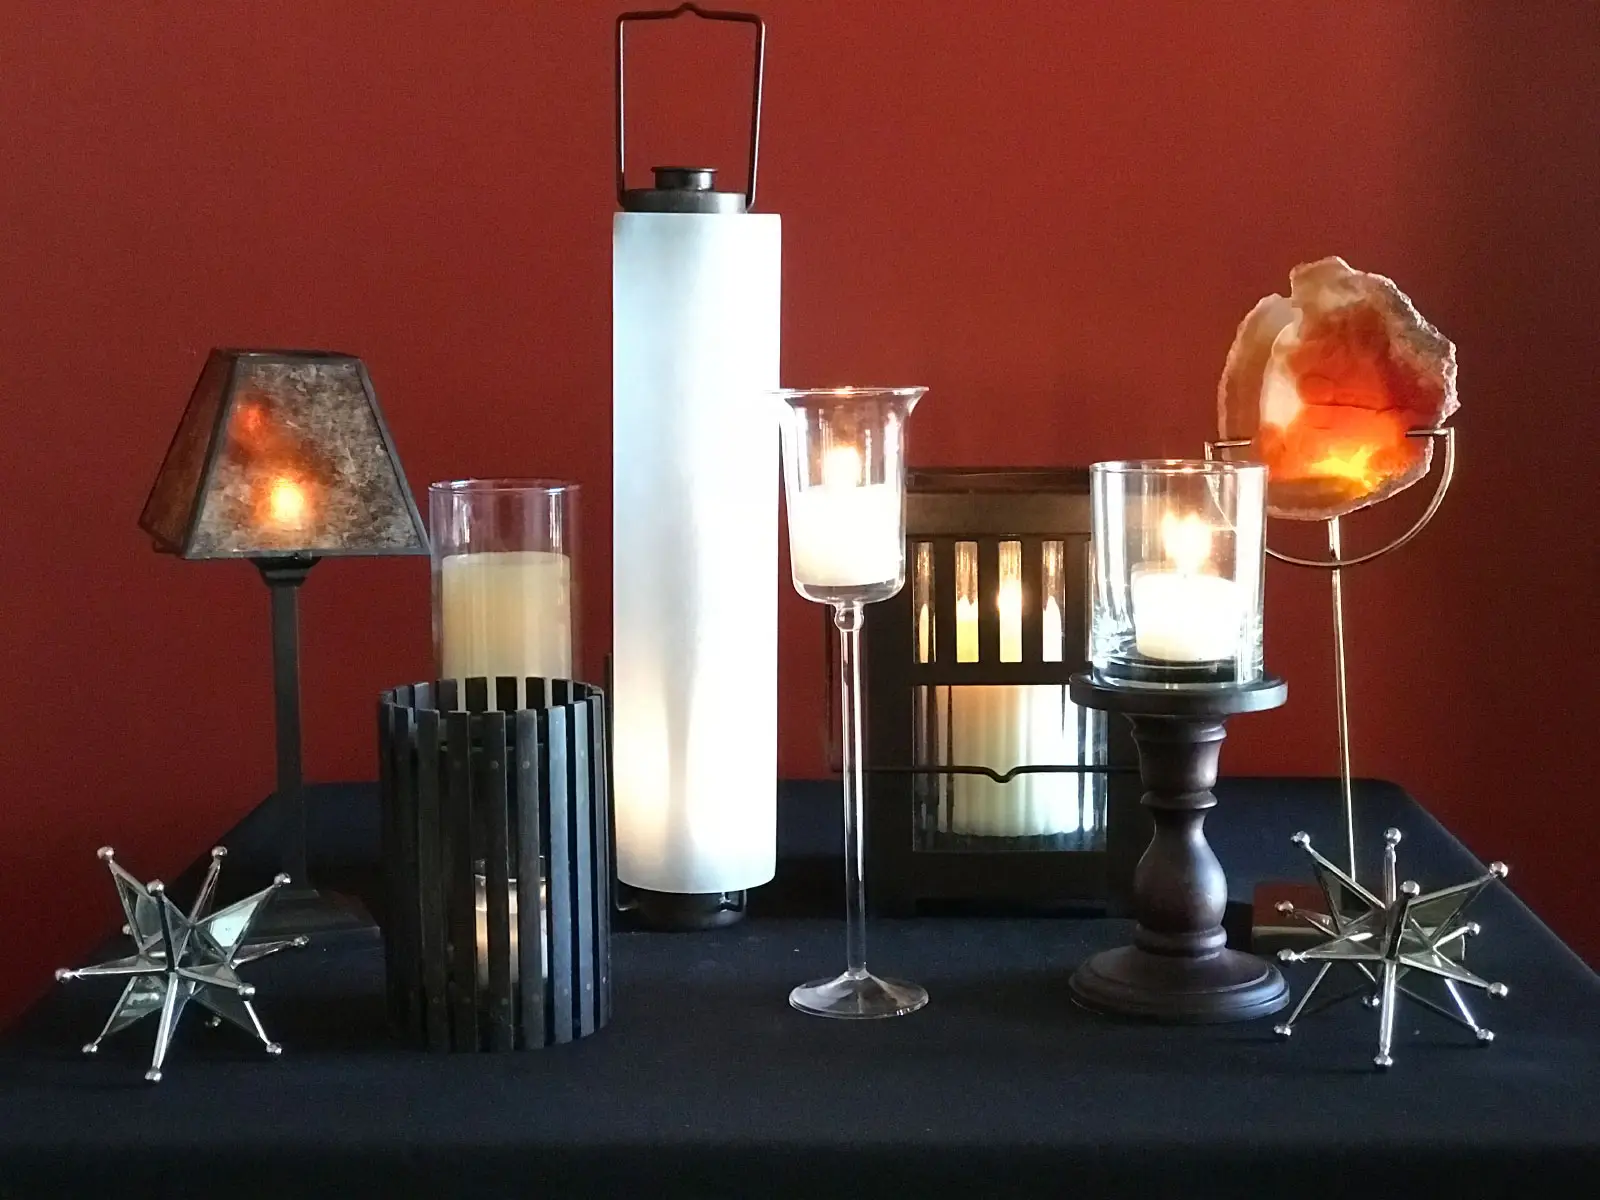 Sets of candles, star decorations and lamp centerpieces